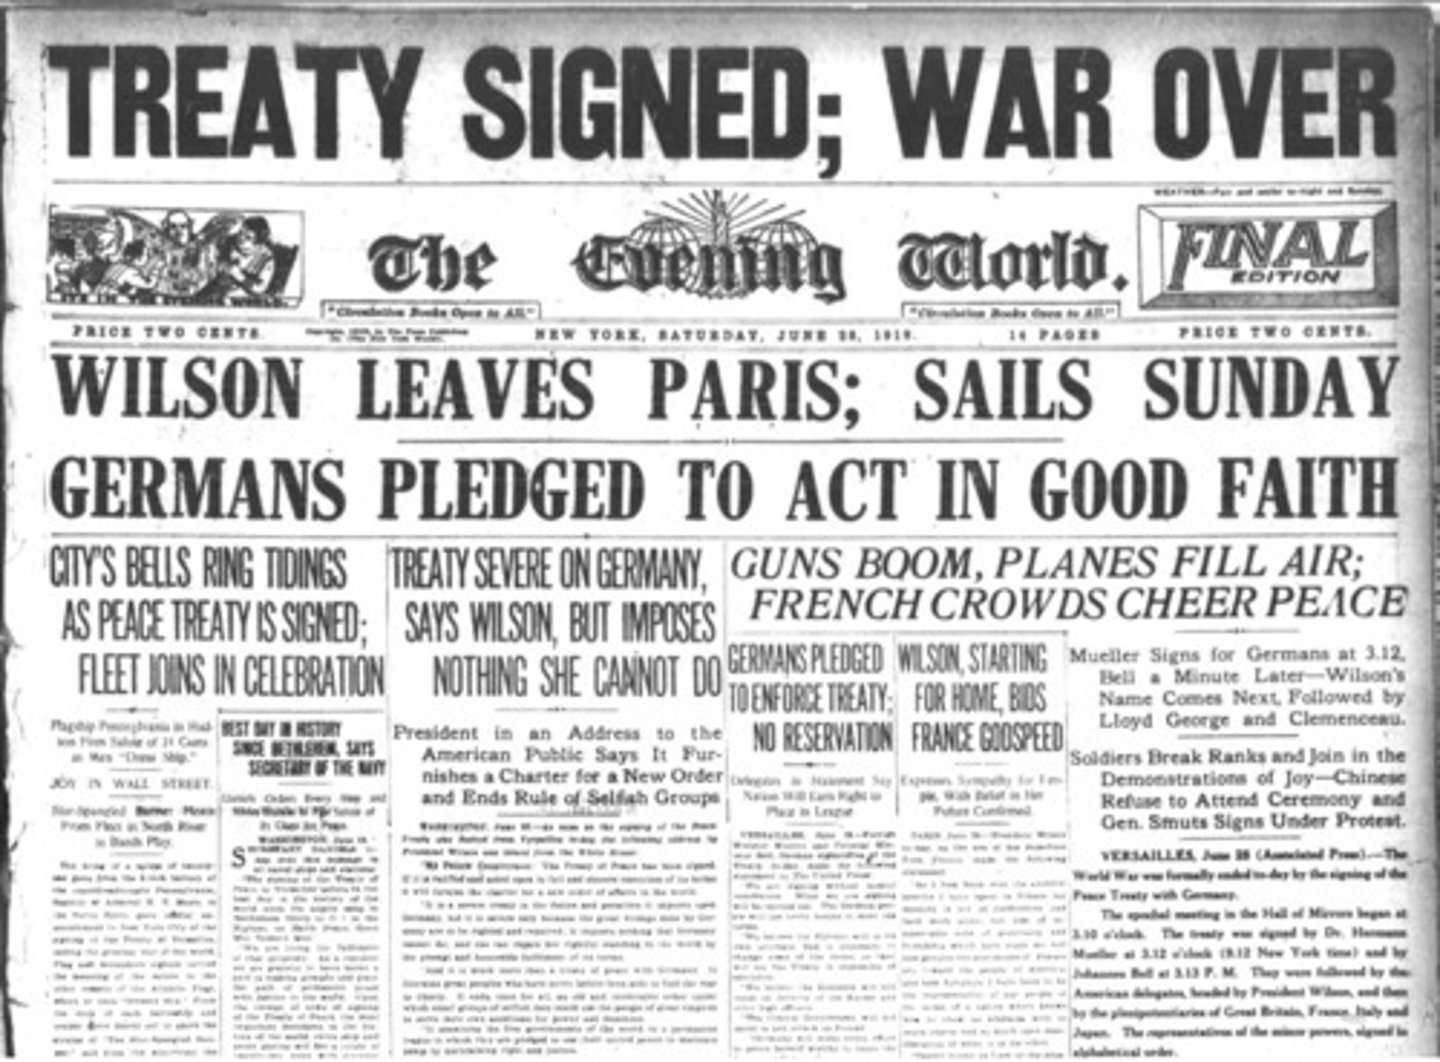 <p>The peace treaty at the end of World War I. It ended the state of war between Germany and the Allied Powers.</p>